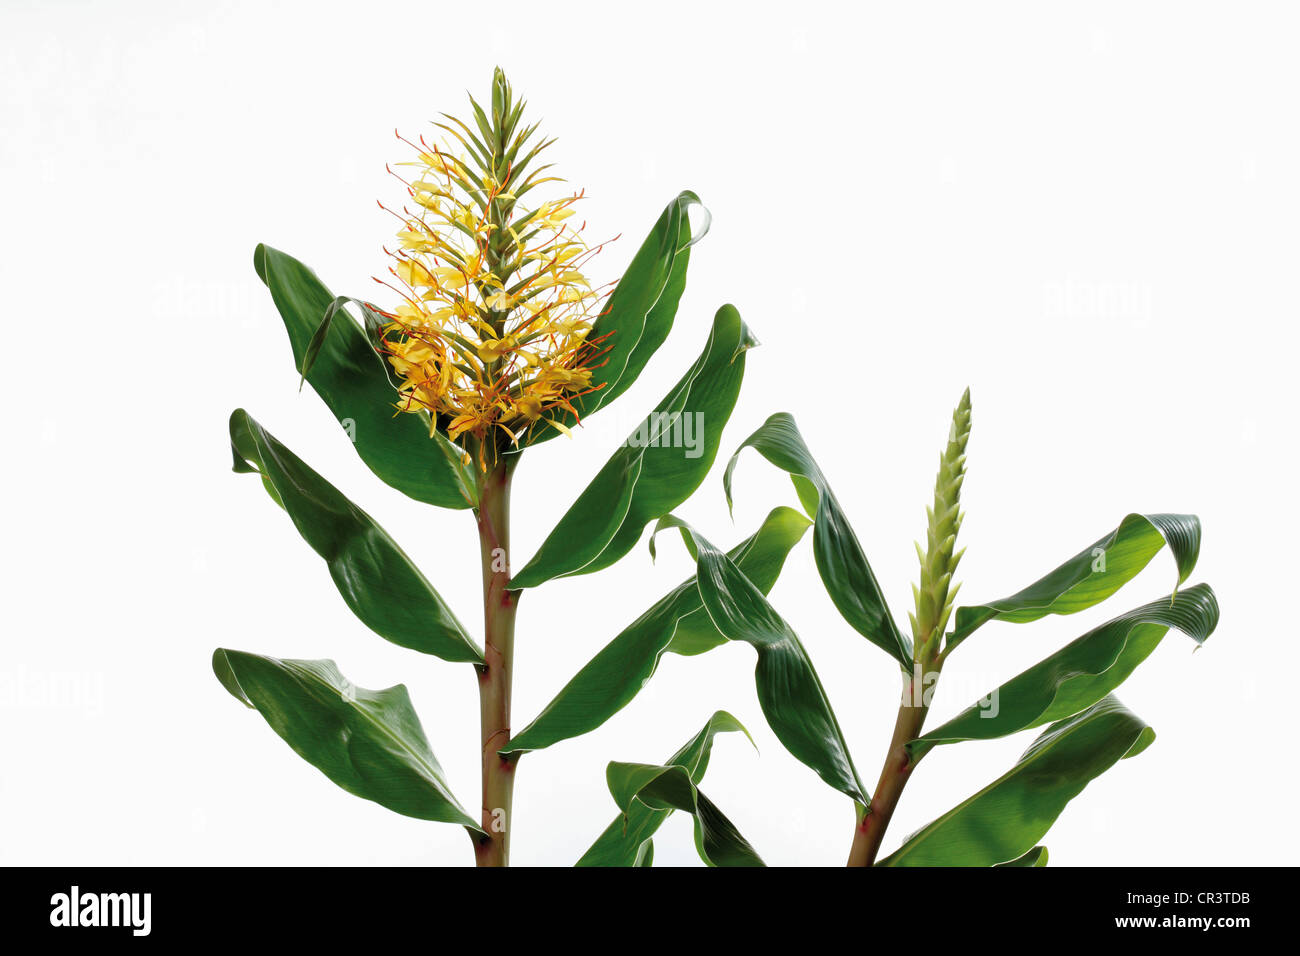 Blossoming Kahili Ginger or Ginger Lily (Hedychium gardnerianum), medicinal plant Stock Photo